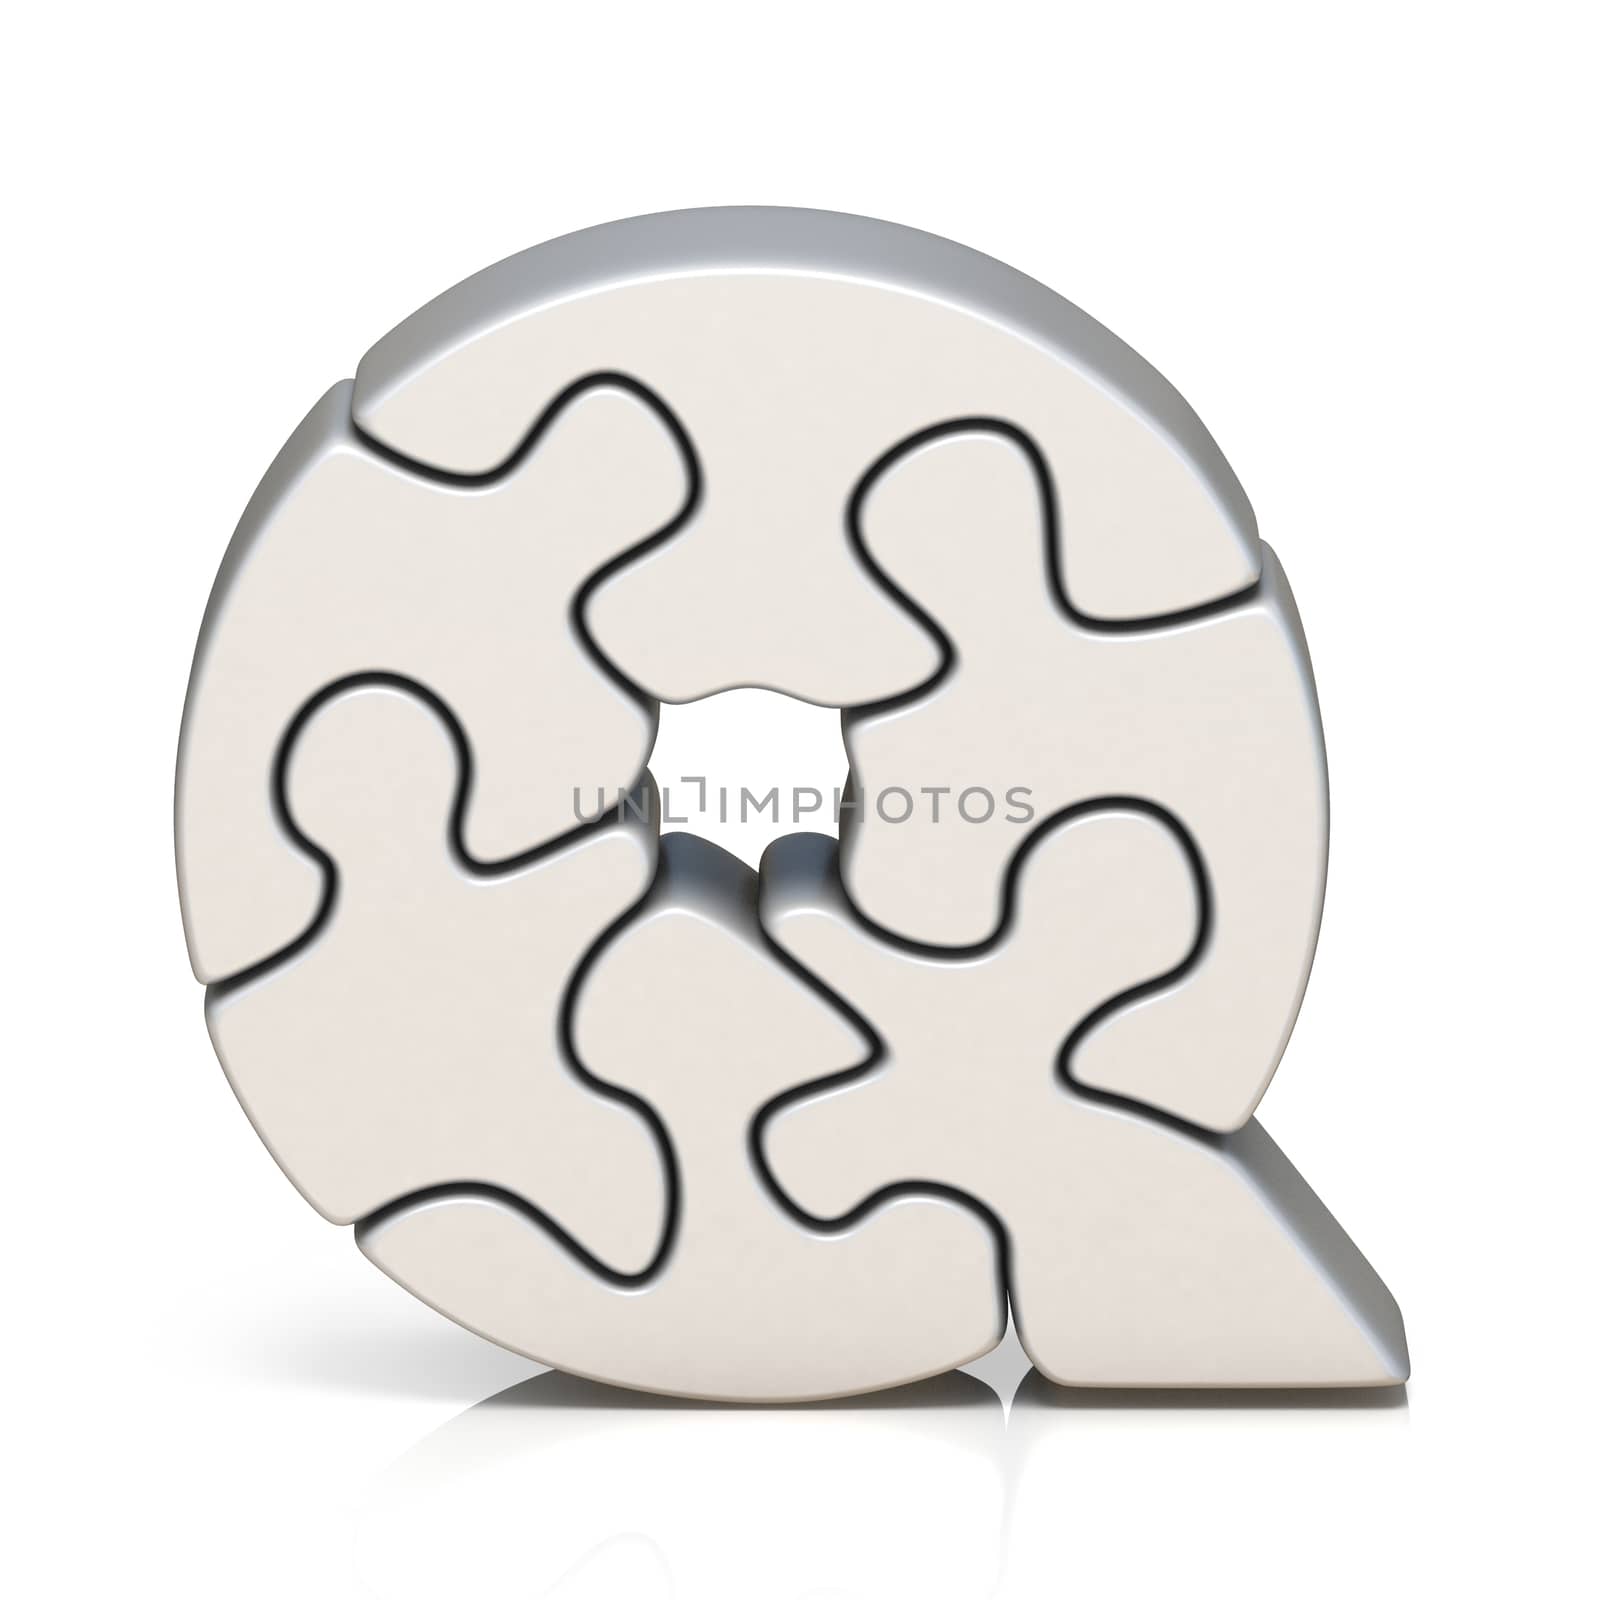 White puzzle jigsaw letter Q 3D render illustration isolated on white background